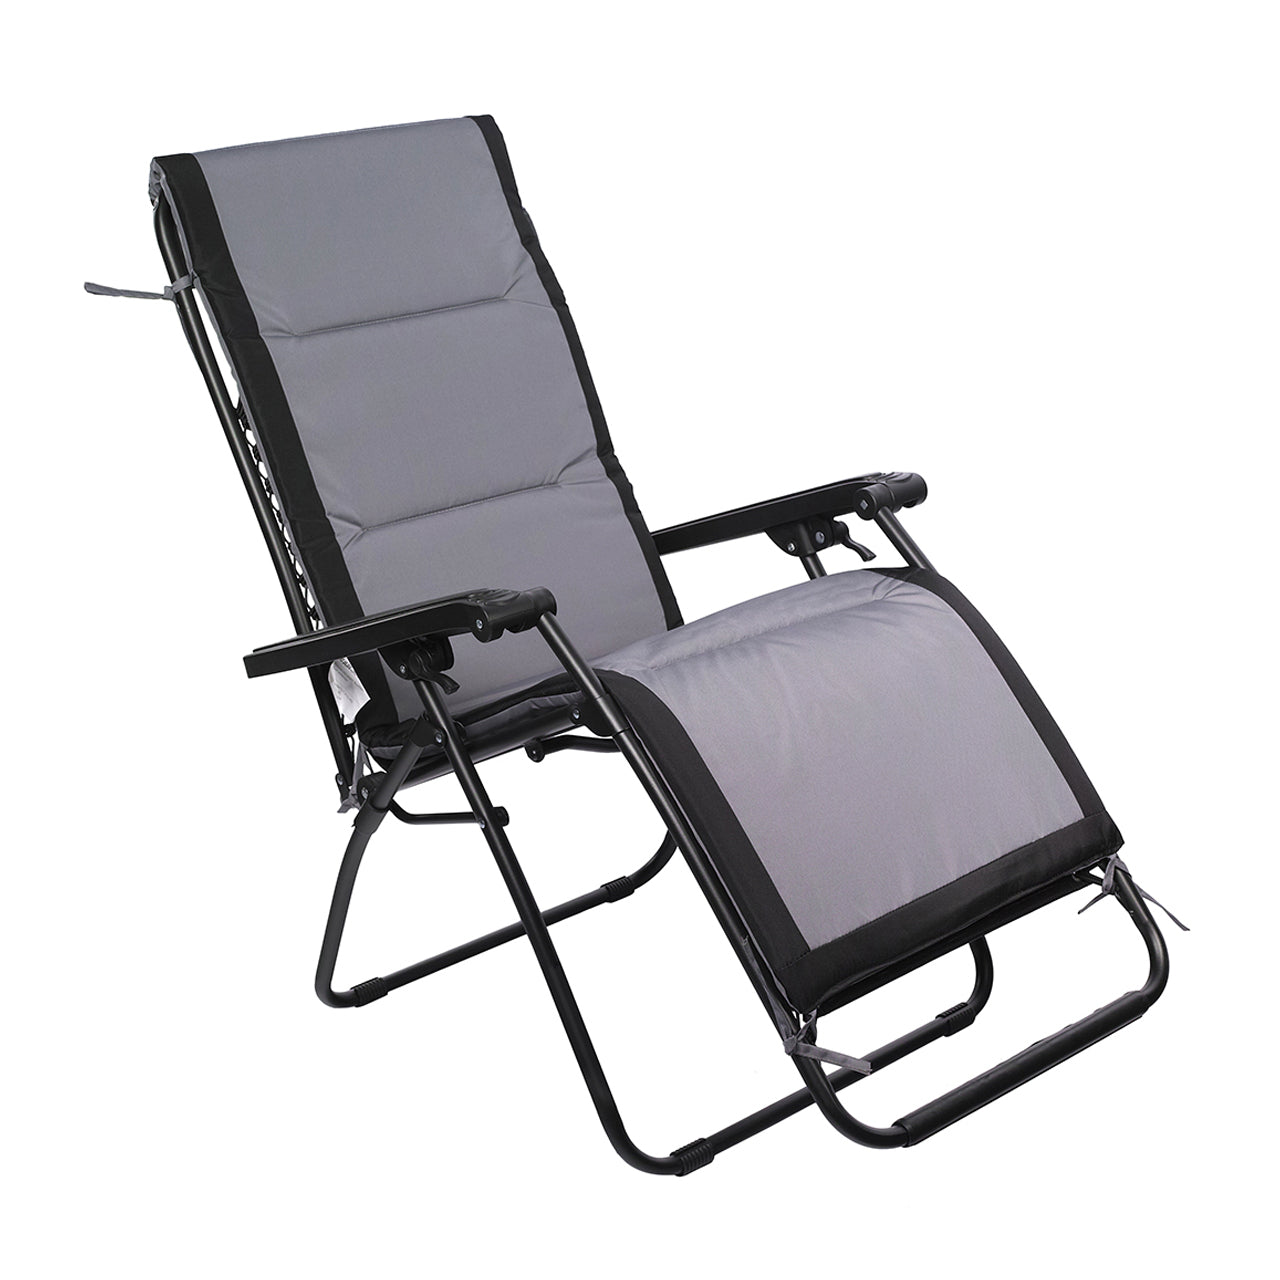 Bliss Hammocks Gravity Free Recliner Seat Cushion laid on top of a chair.